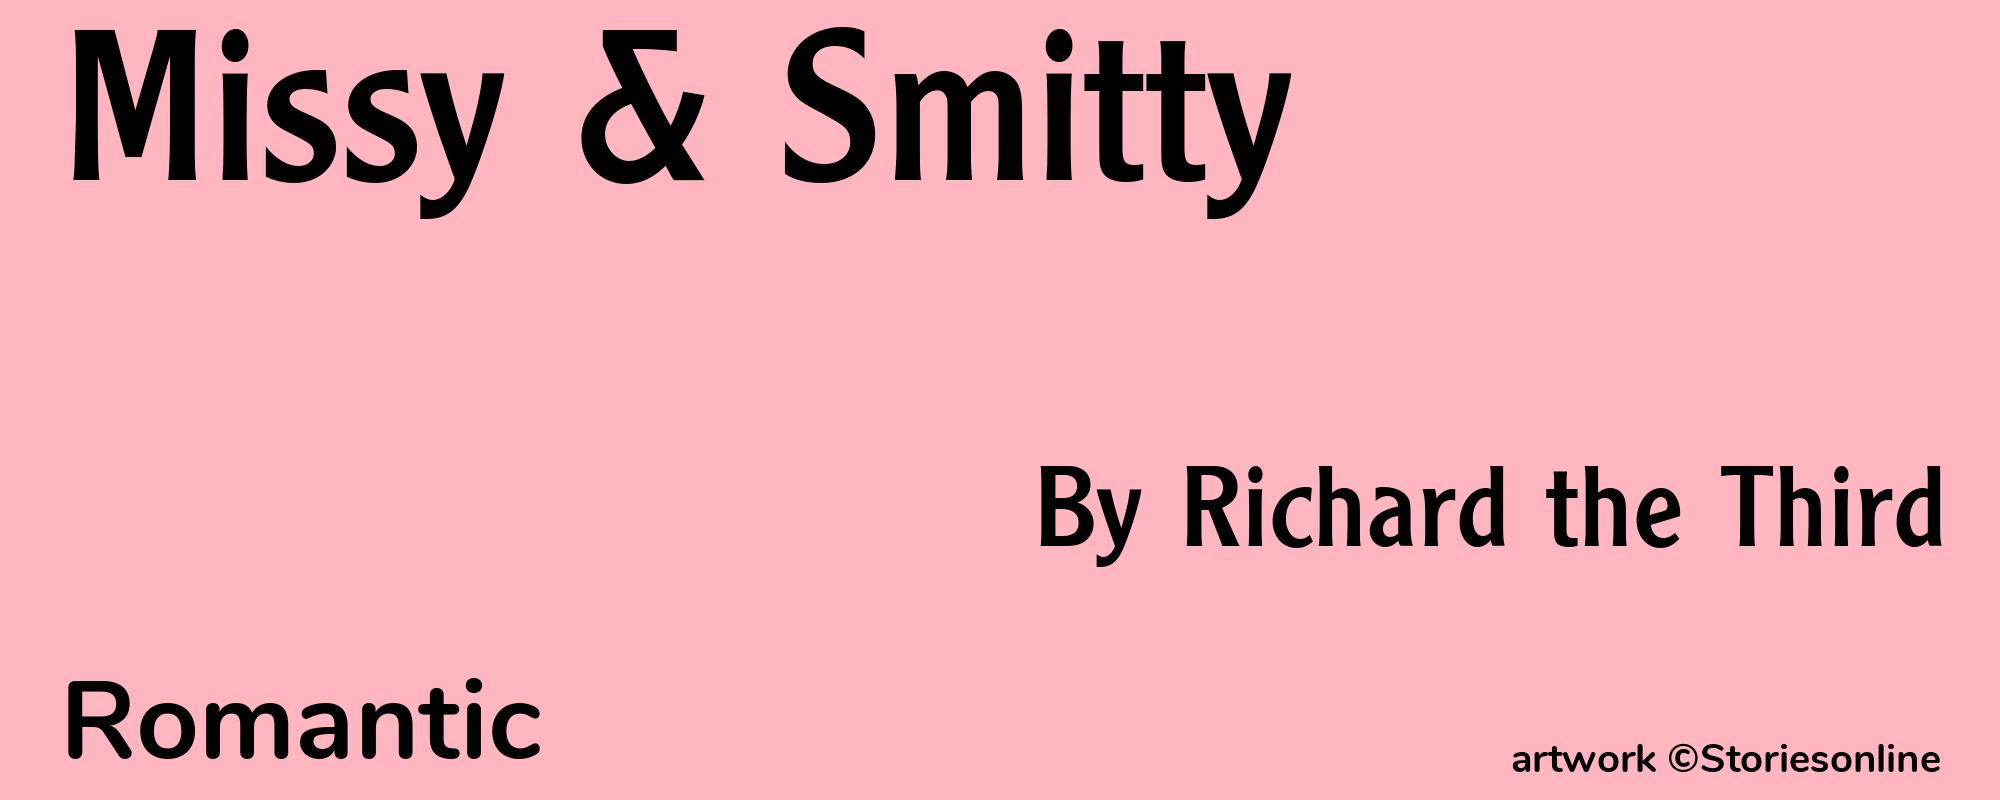 Missy & Smitty - Cover